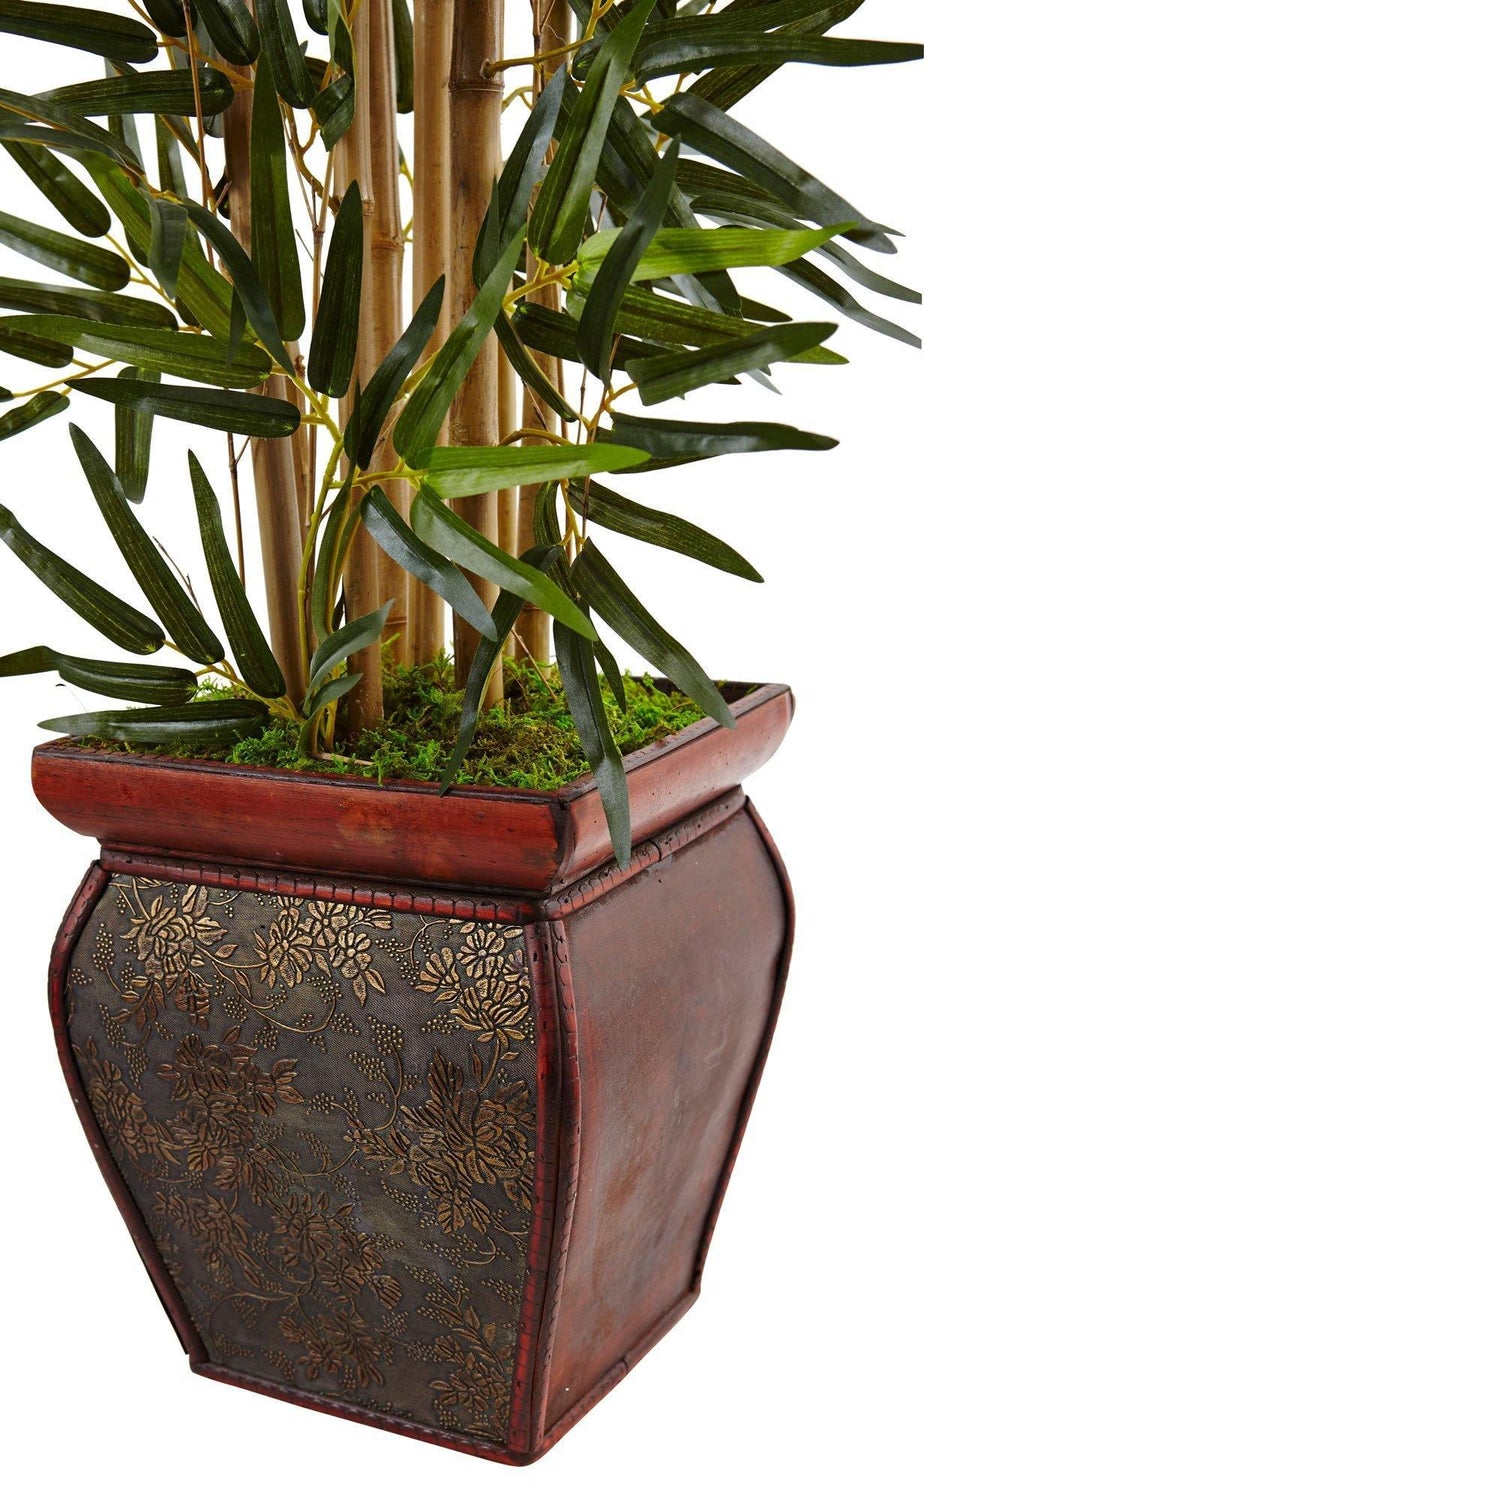 3.5’ Bamboo Tree in Wooden Decorative Planter